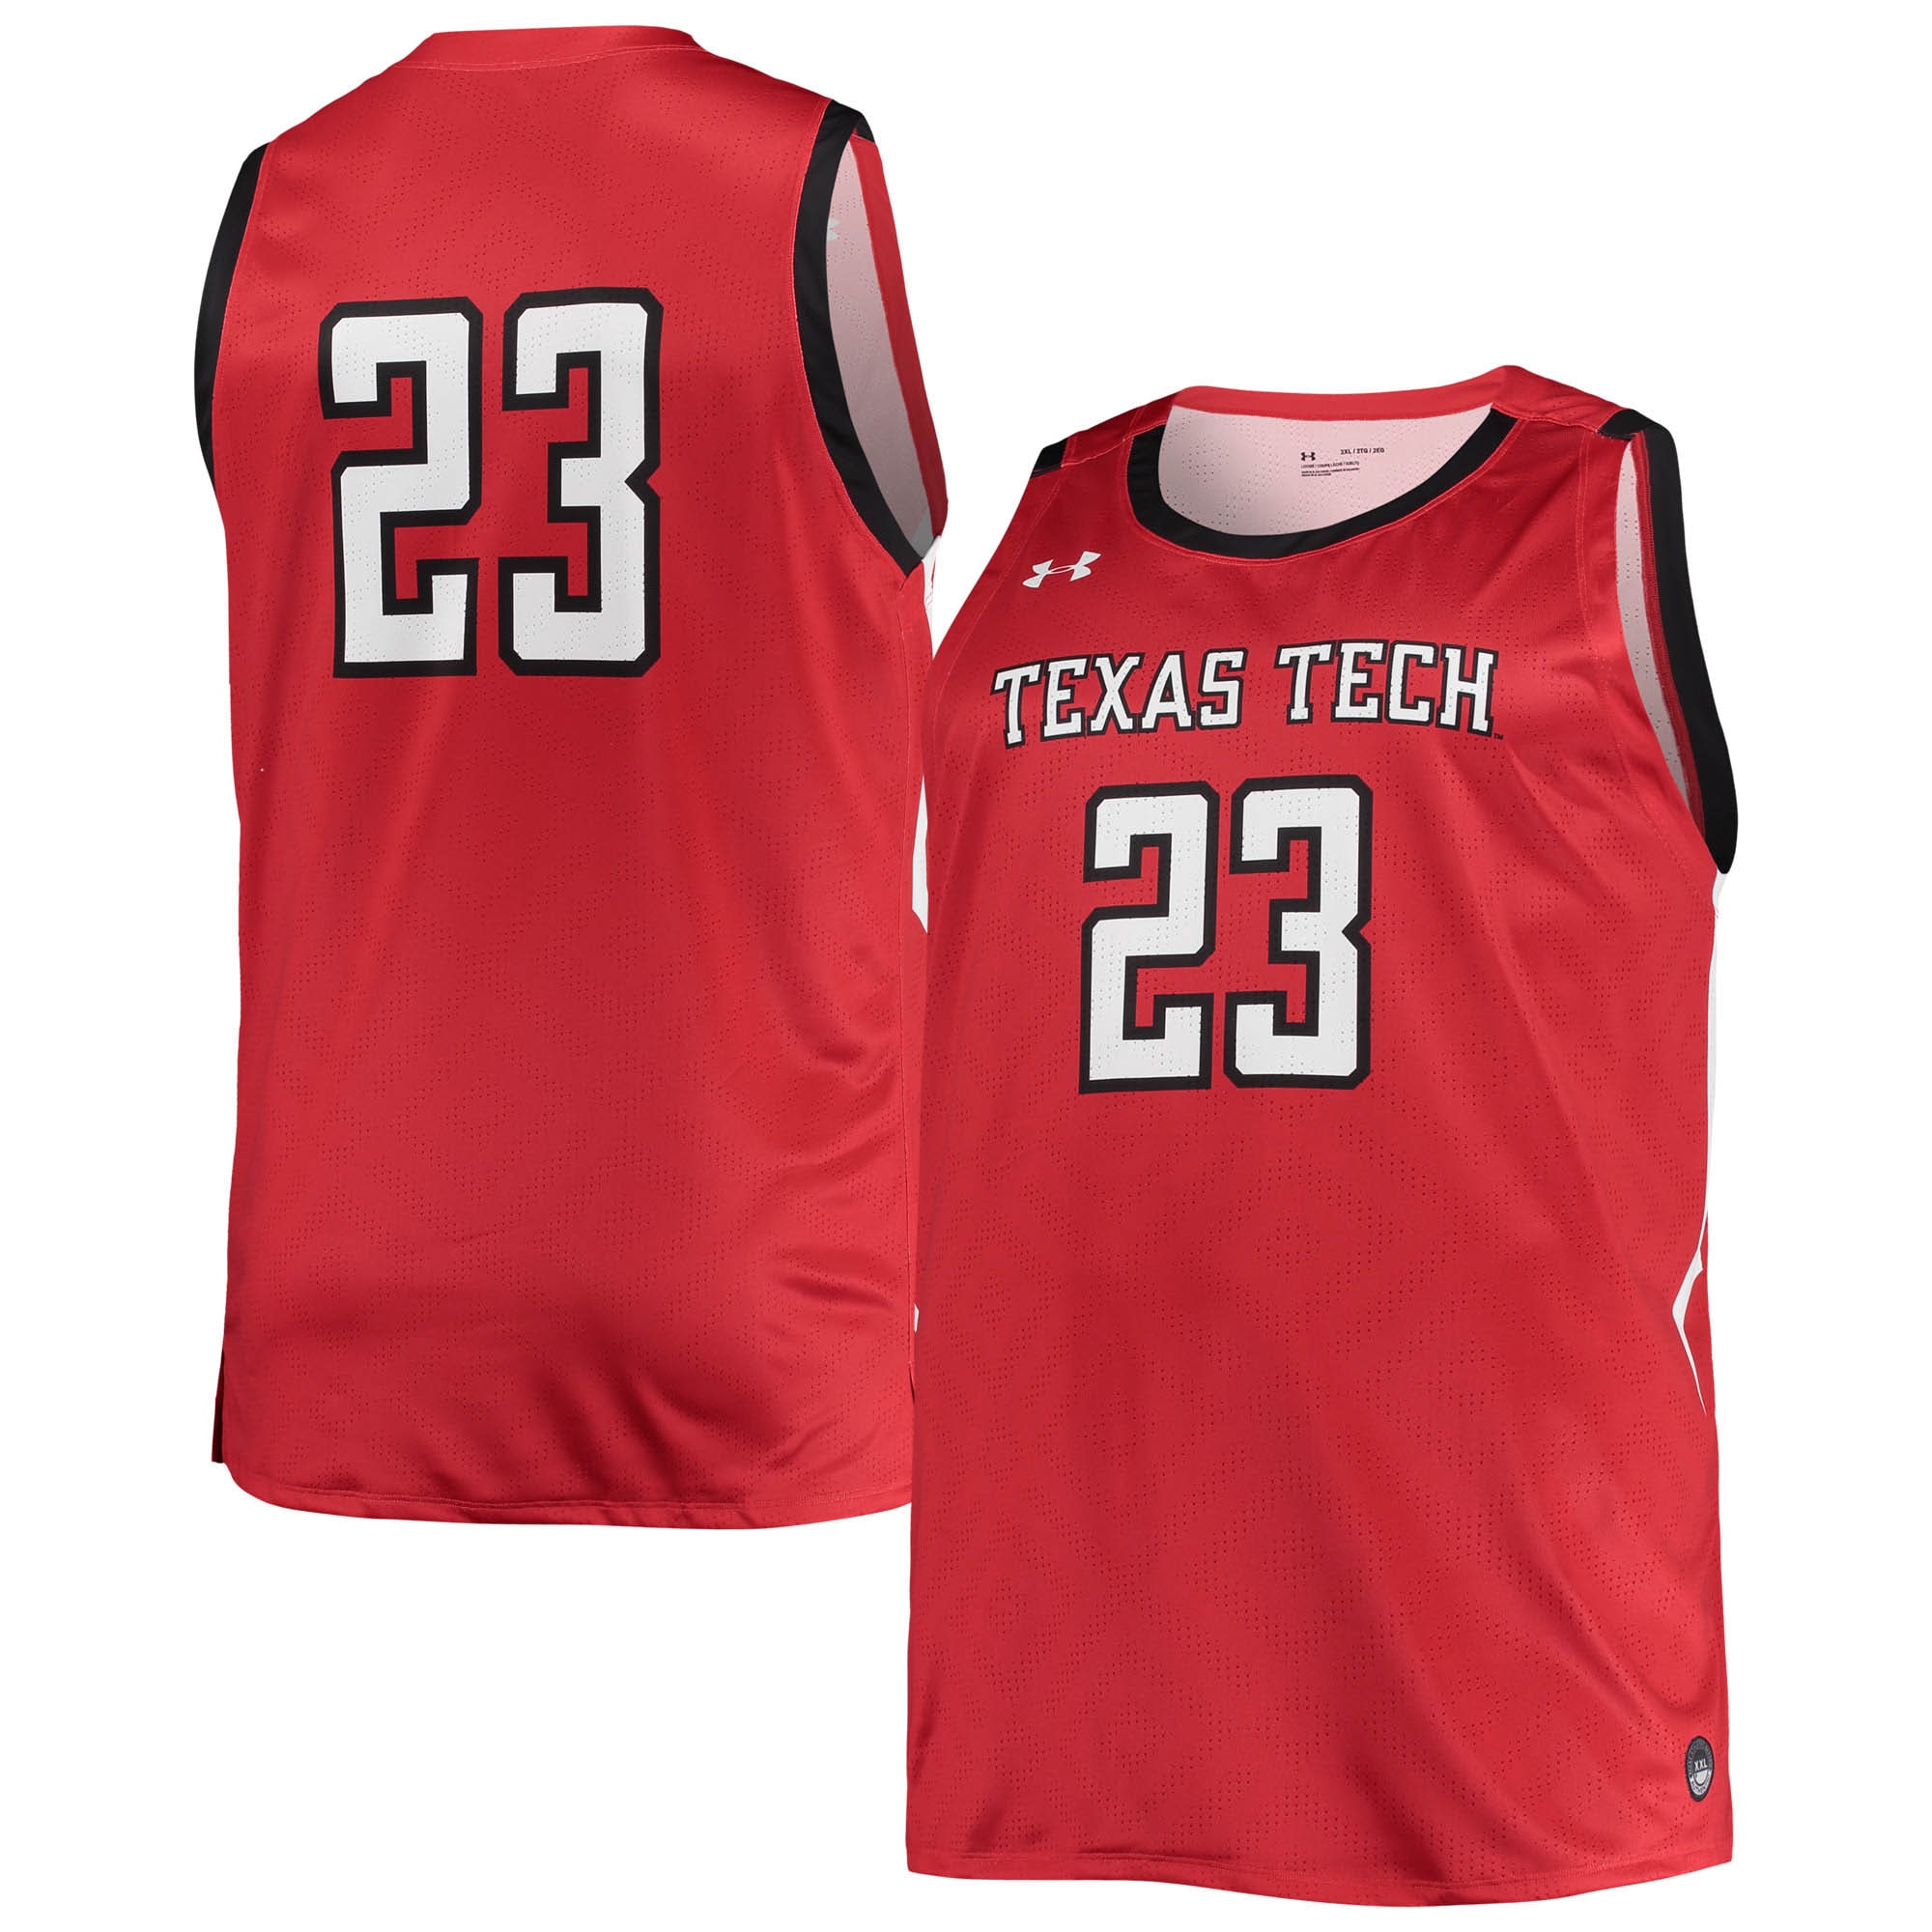 #23 Texas Tech Red Raiders Under Armour Replica Basketball Jersey - Red For Youth Women Men